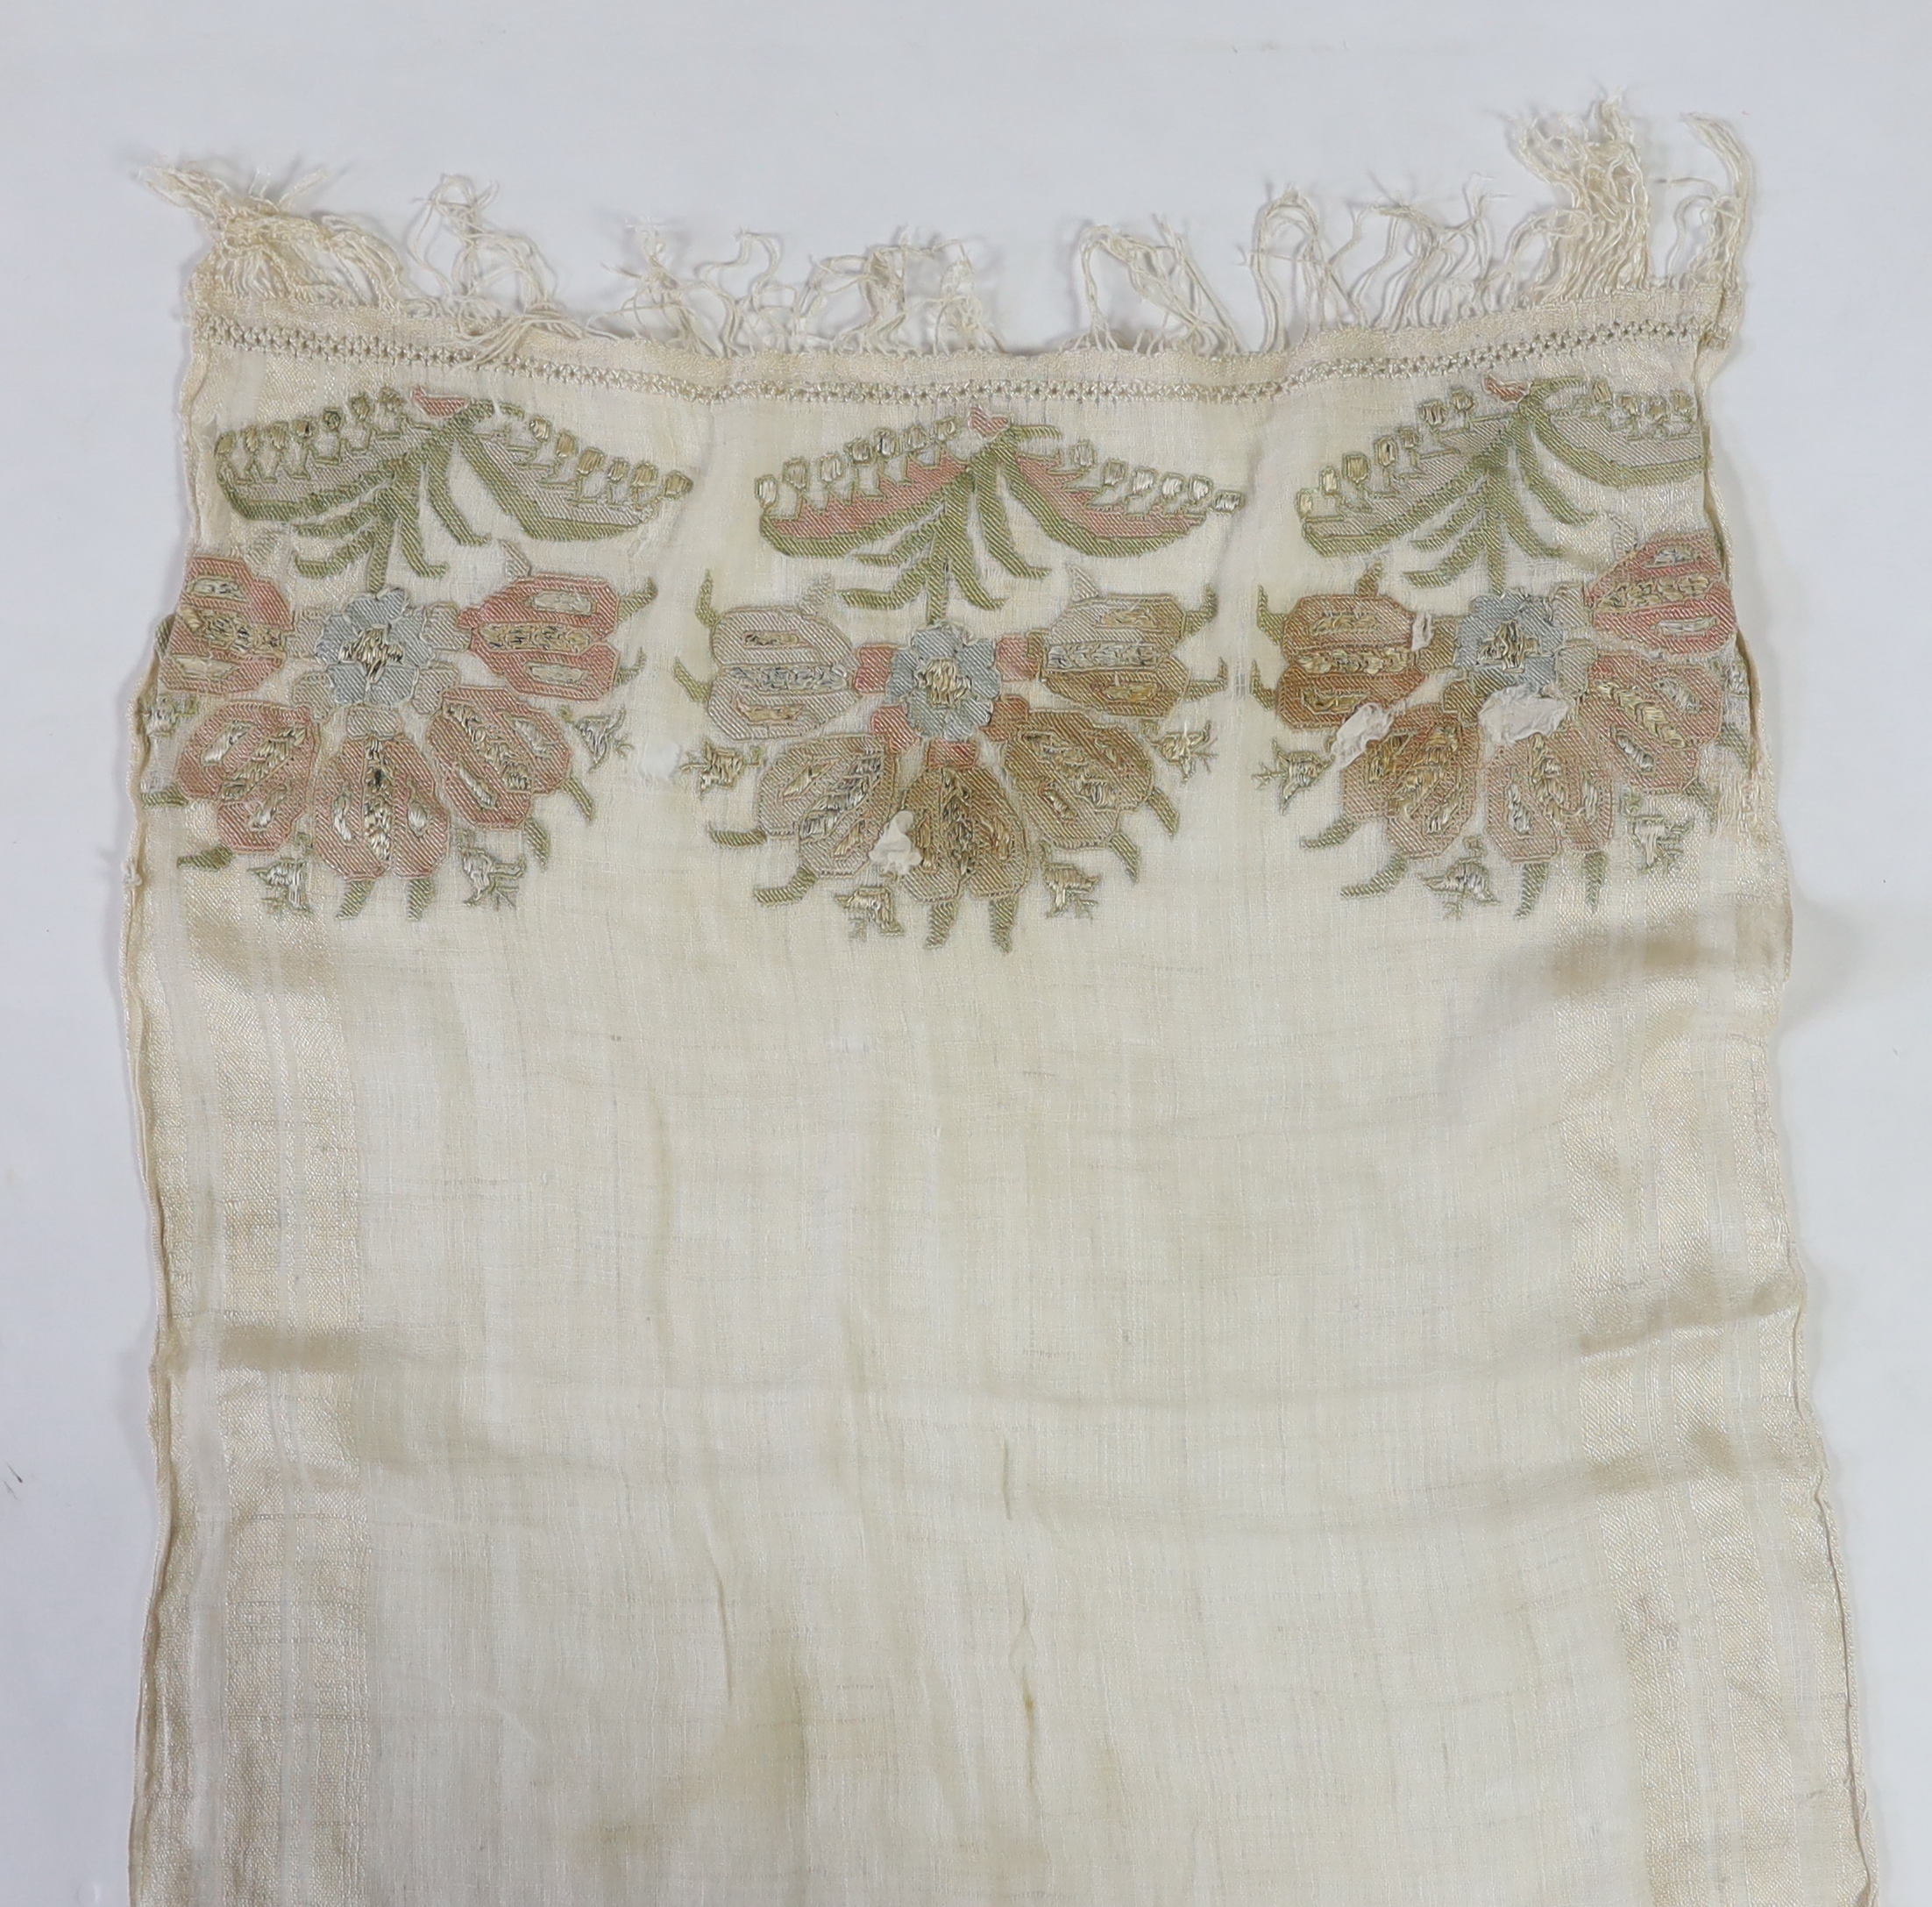 A 19th century Turkish towel, embroidered with flower motifs, in pastel shades, with fine silk fringing embroidered onto a fine hand spun linen, woven with stripes to each side, 48cm wide, 120cm long